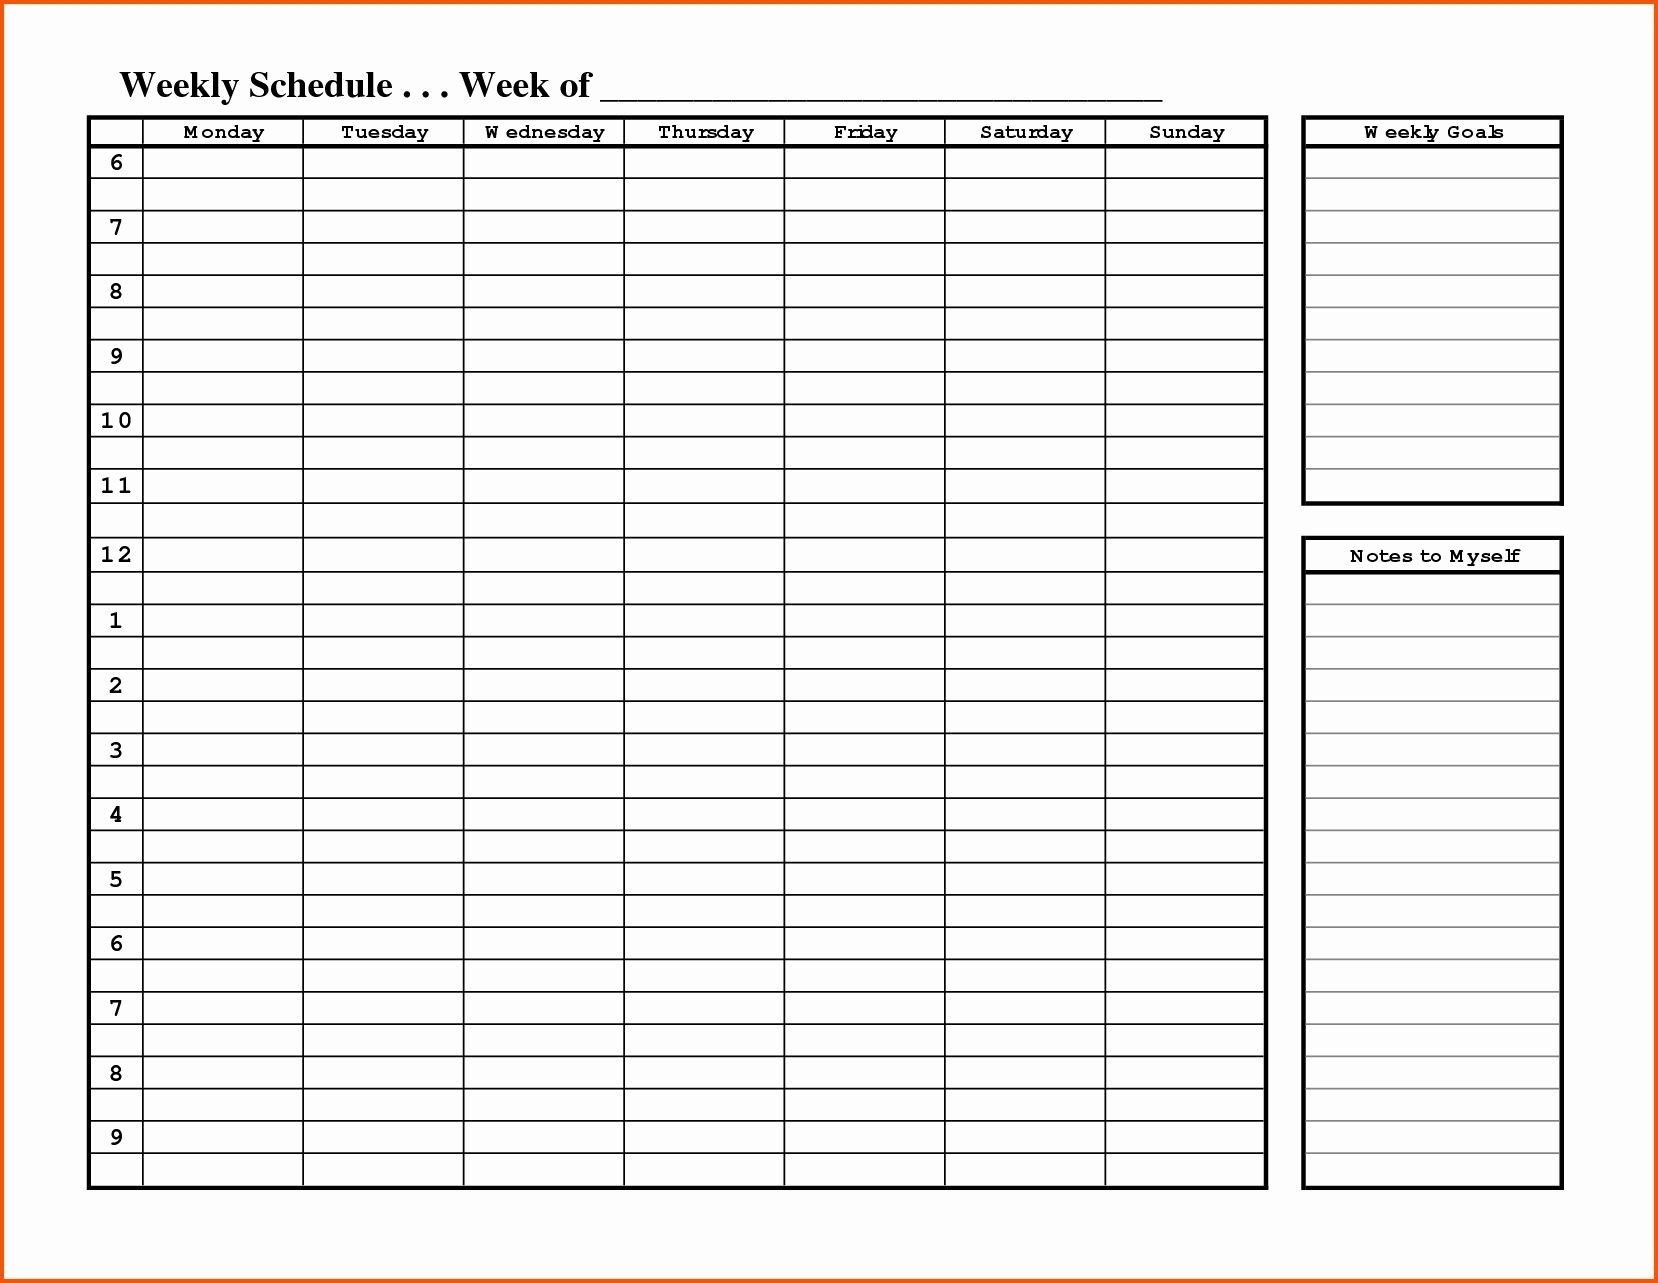 Weekly Hourly Planner Template Word | Daily Calendar-Free Hourly Calendar 2021